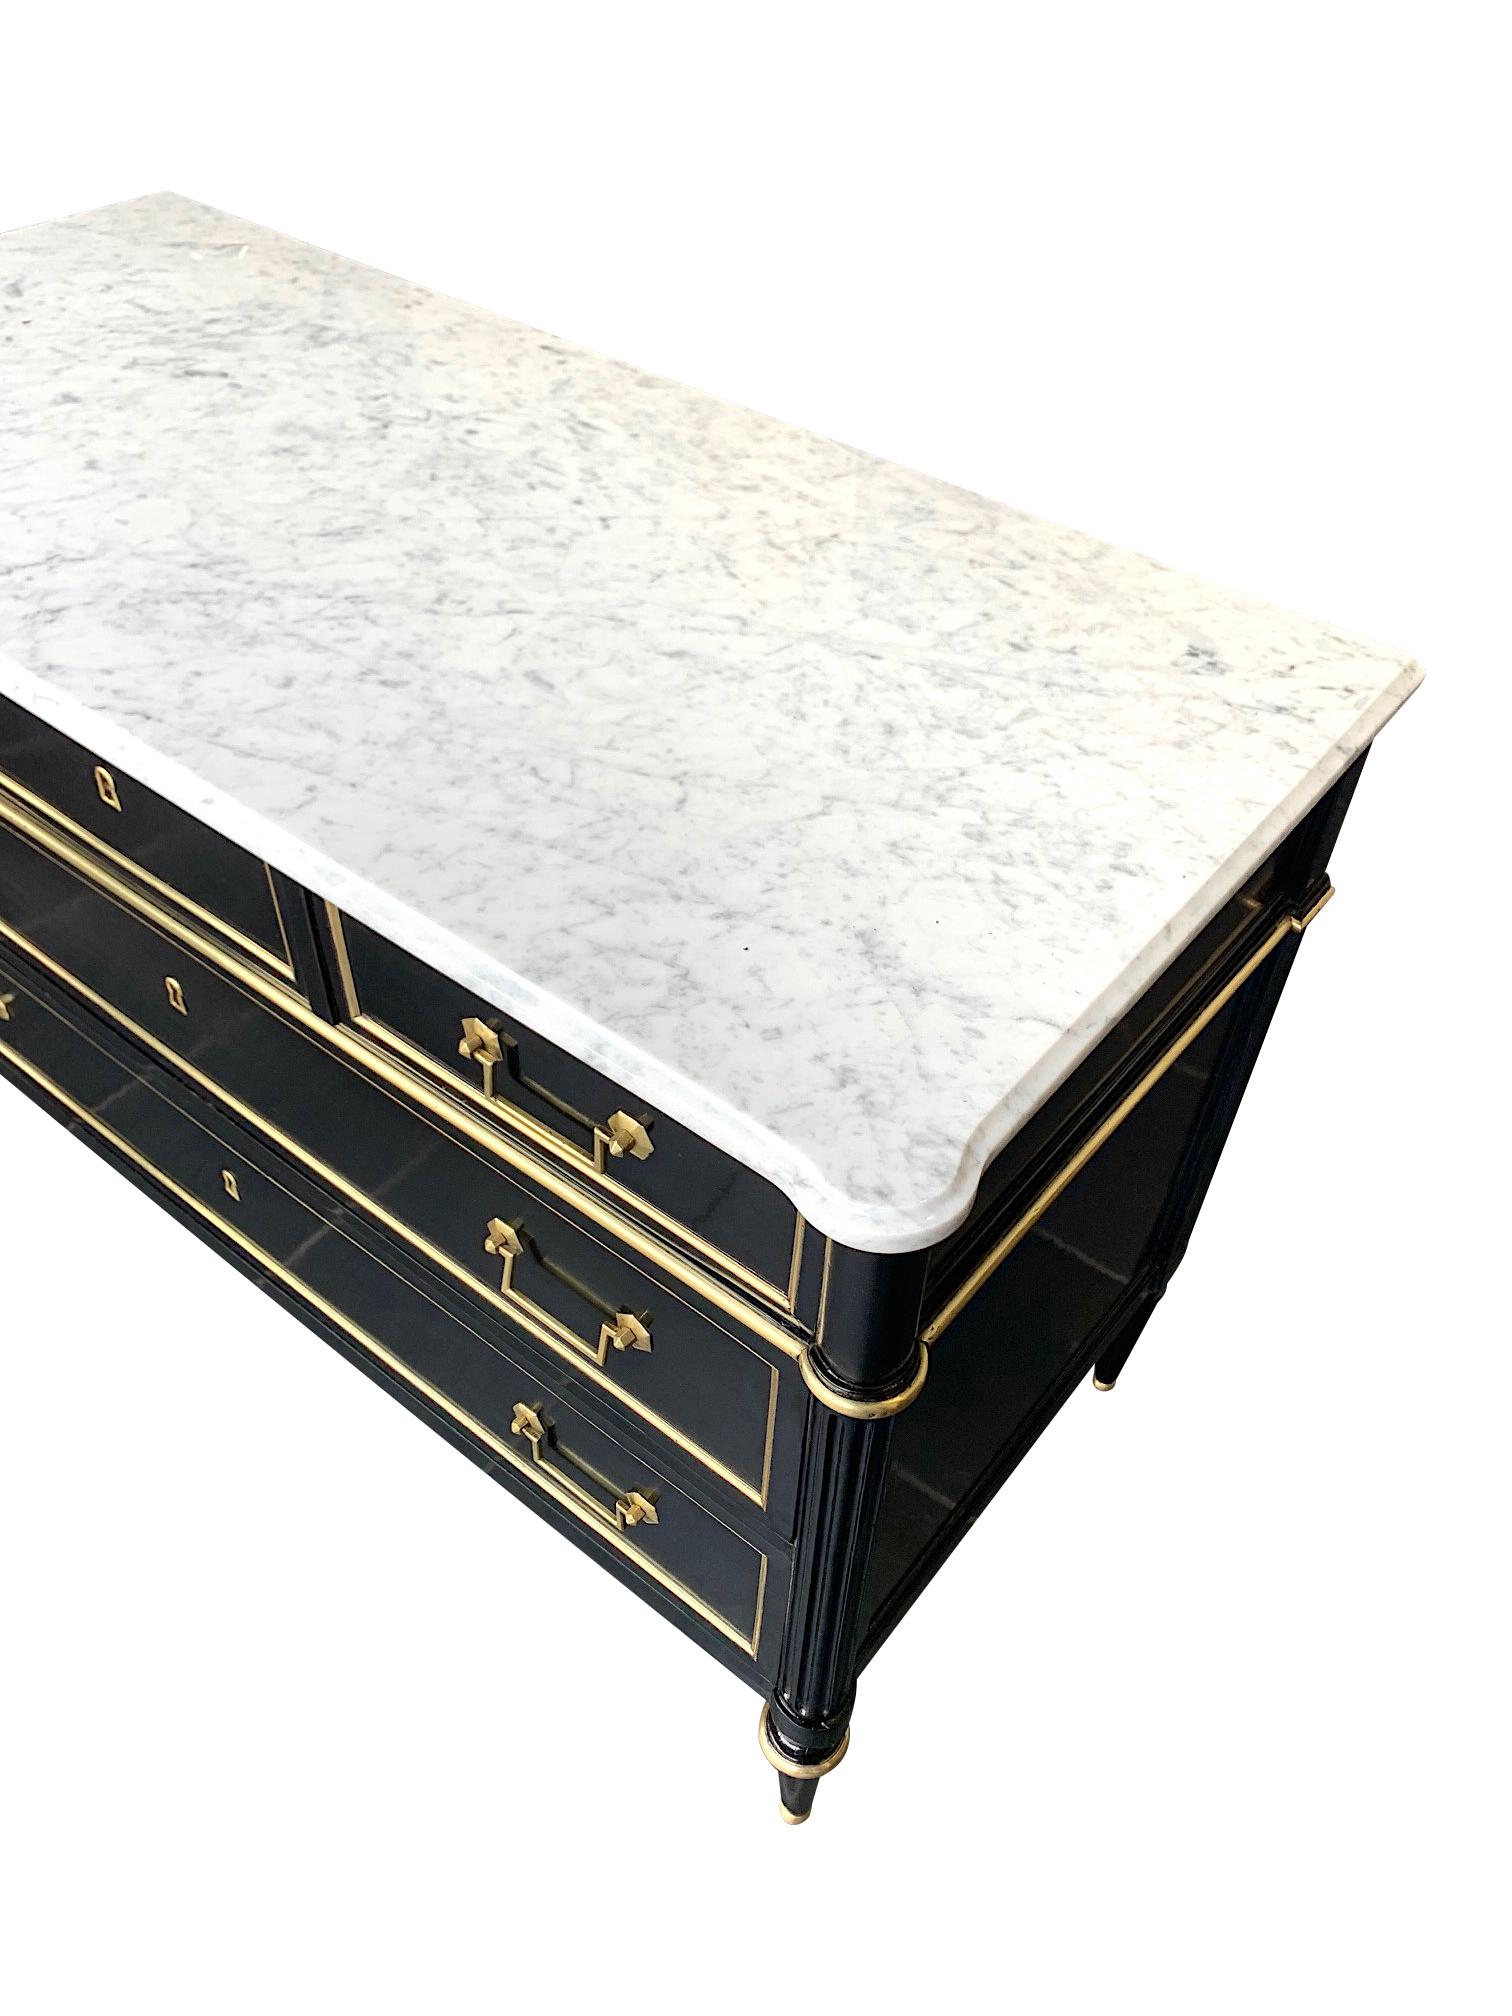 Lovely Antique French Louis XVI Style Ebonised Commode with Carrara Marble Top 3